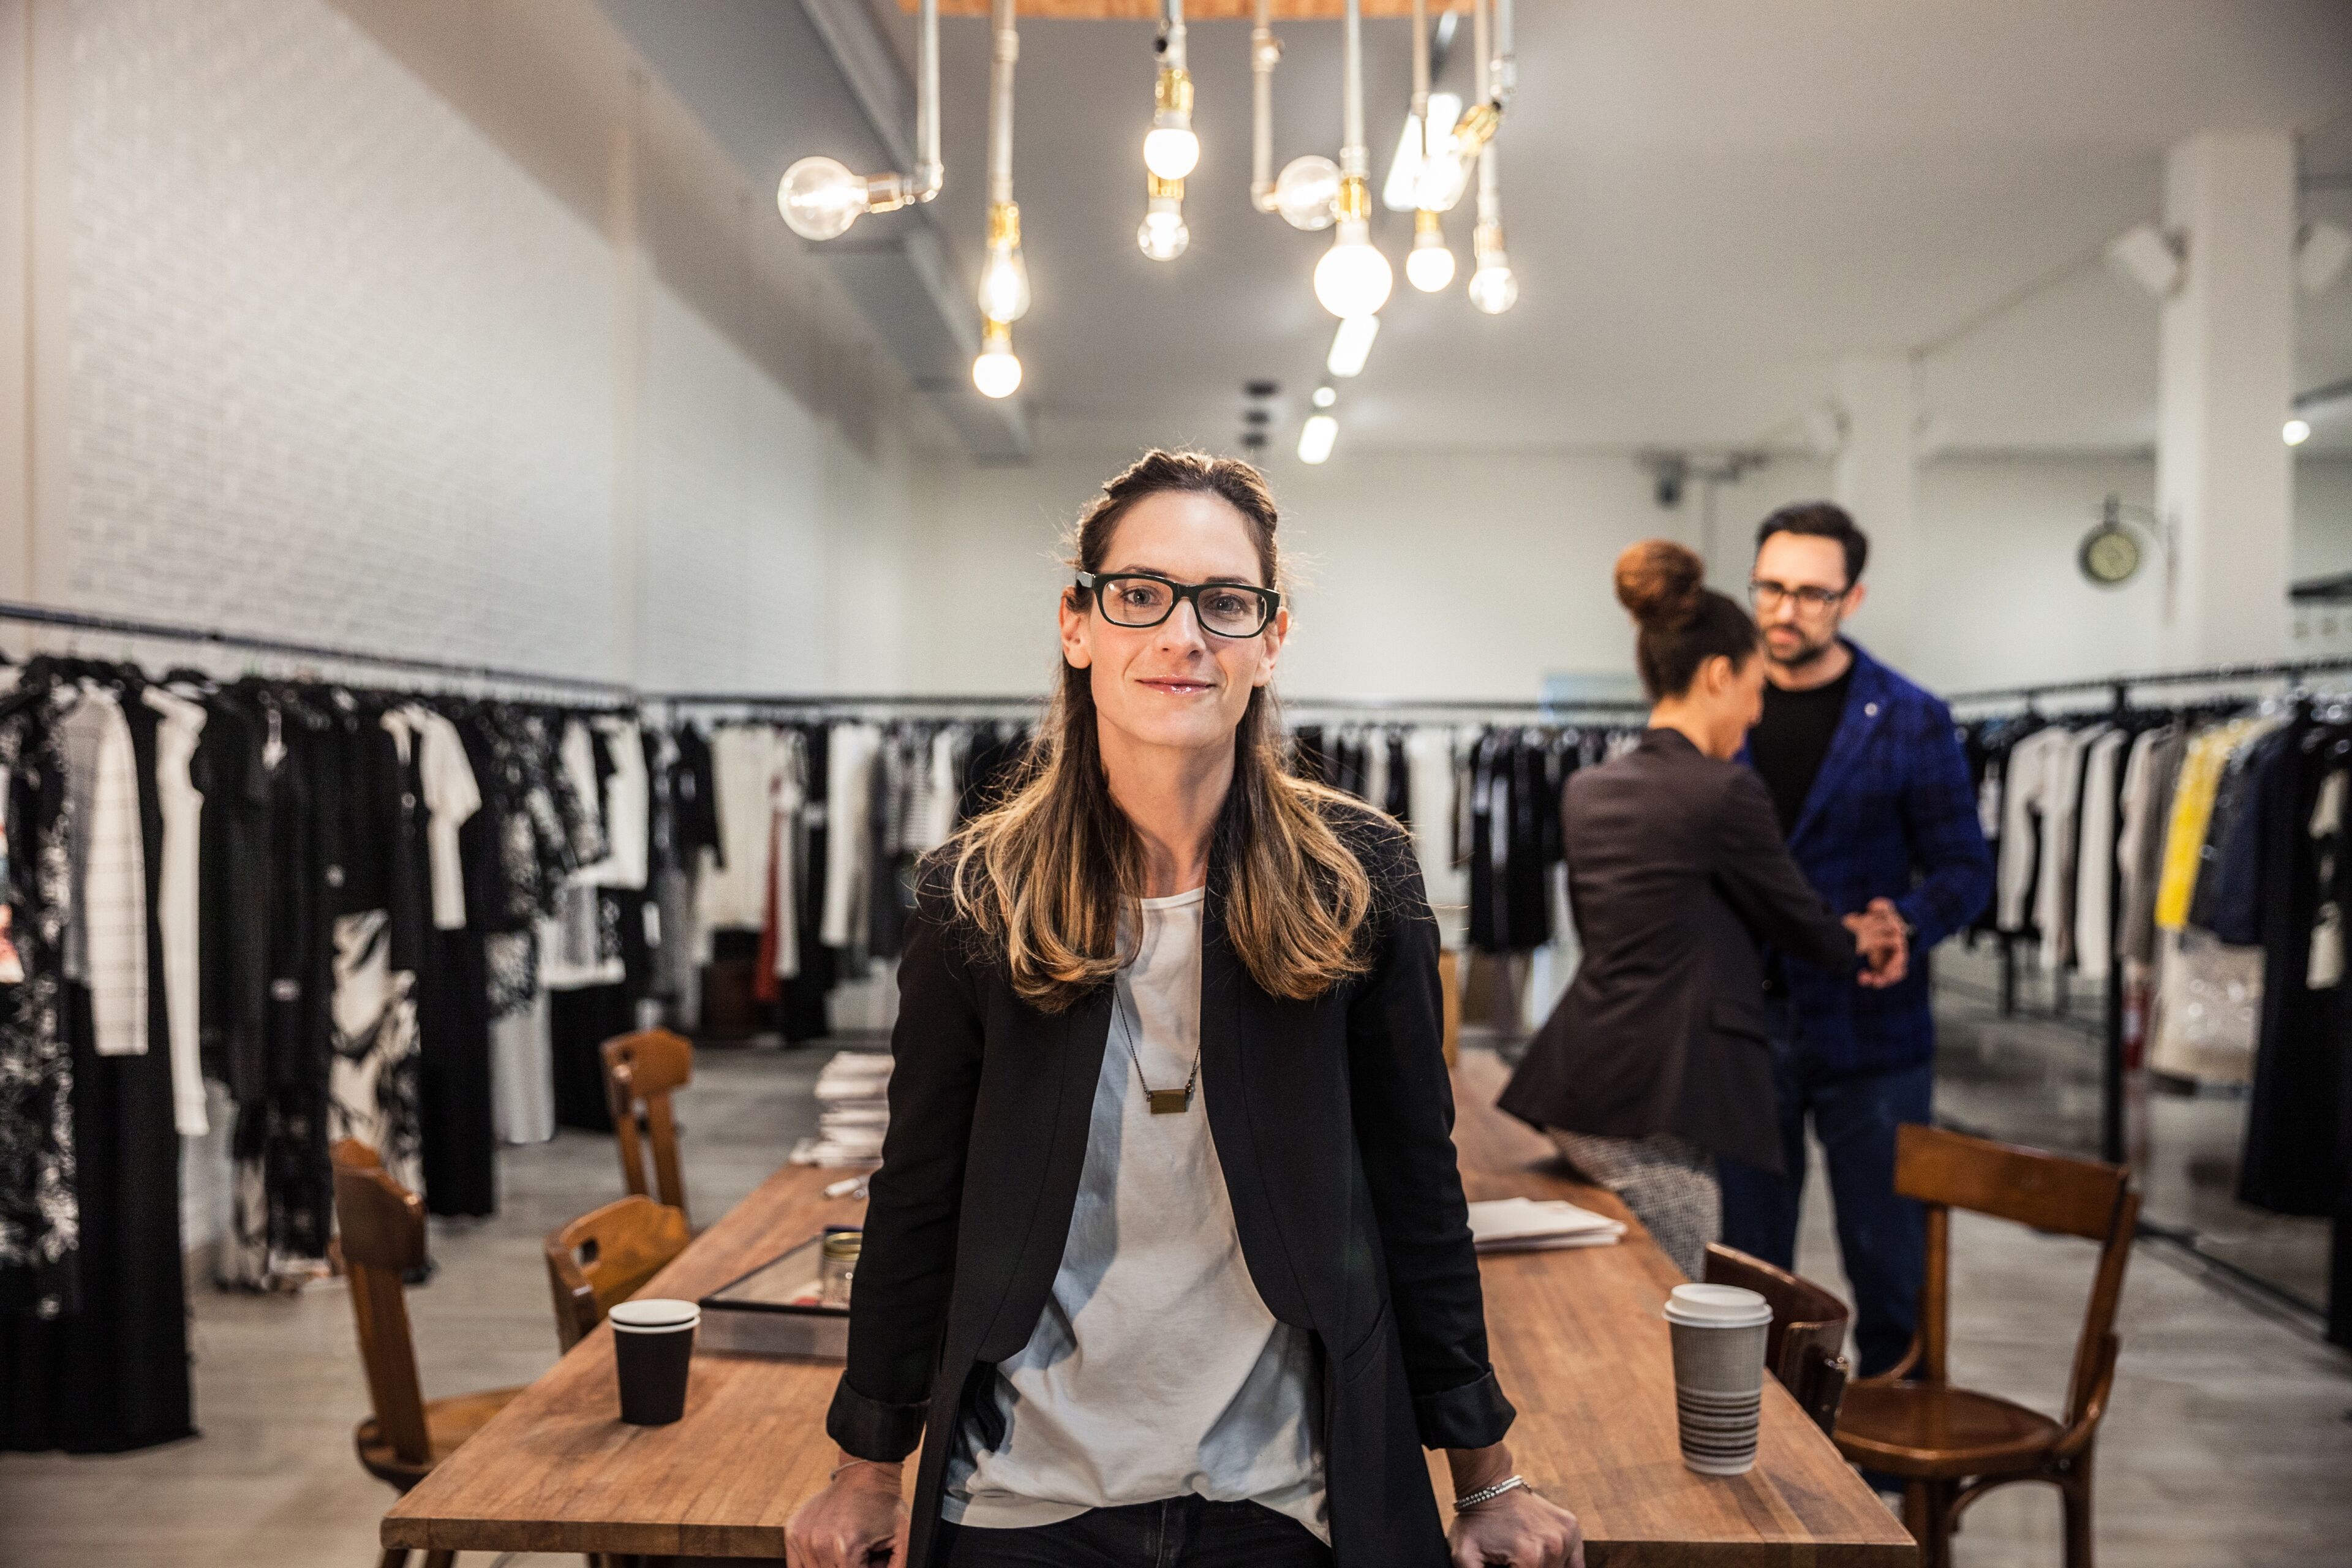 A confident woman with glasses stands smiling at the camera in a chic boutique, racks of clothing in the background.